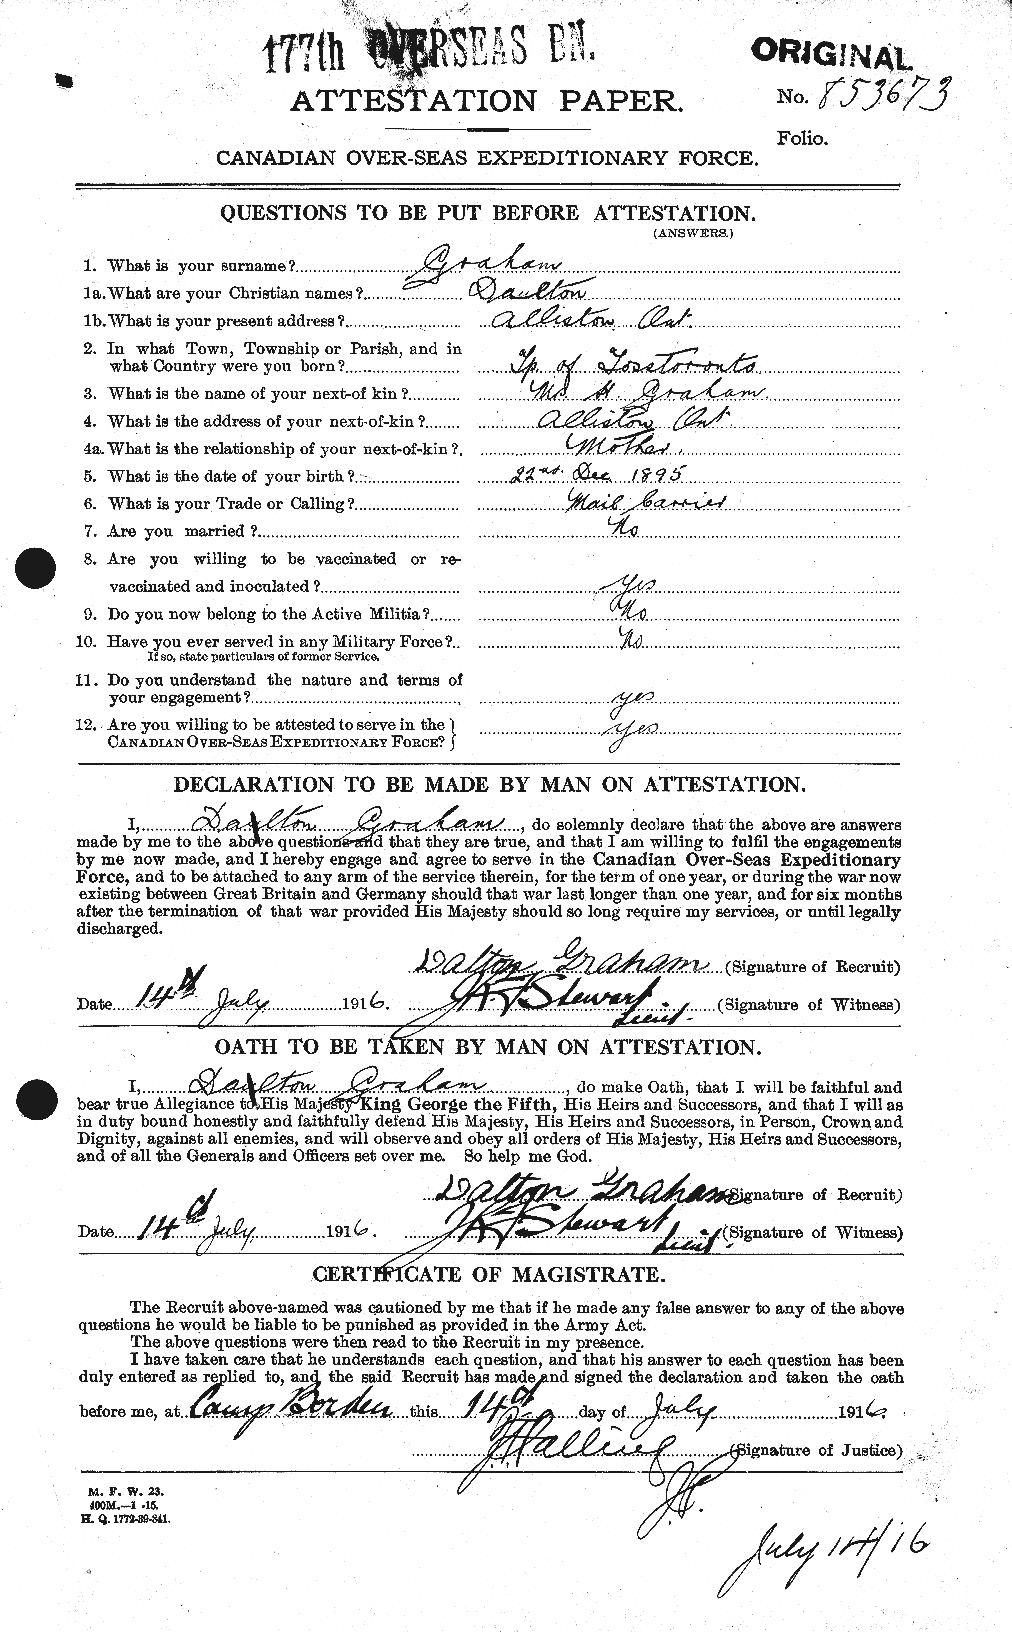 Personnel Records of the First World War - CEF 353808a